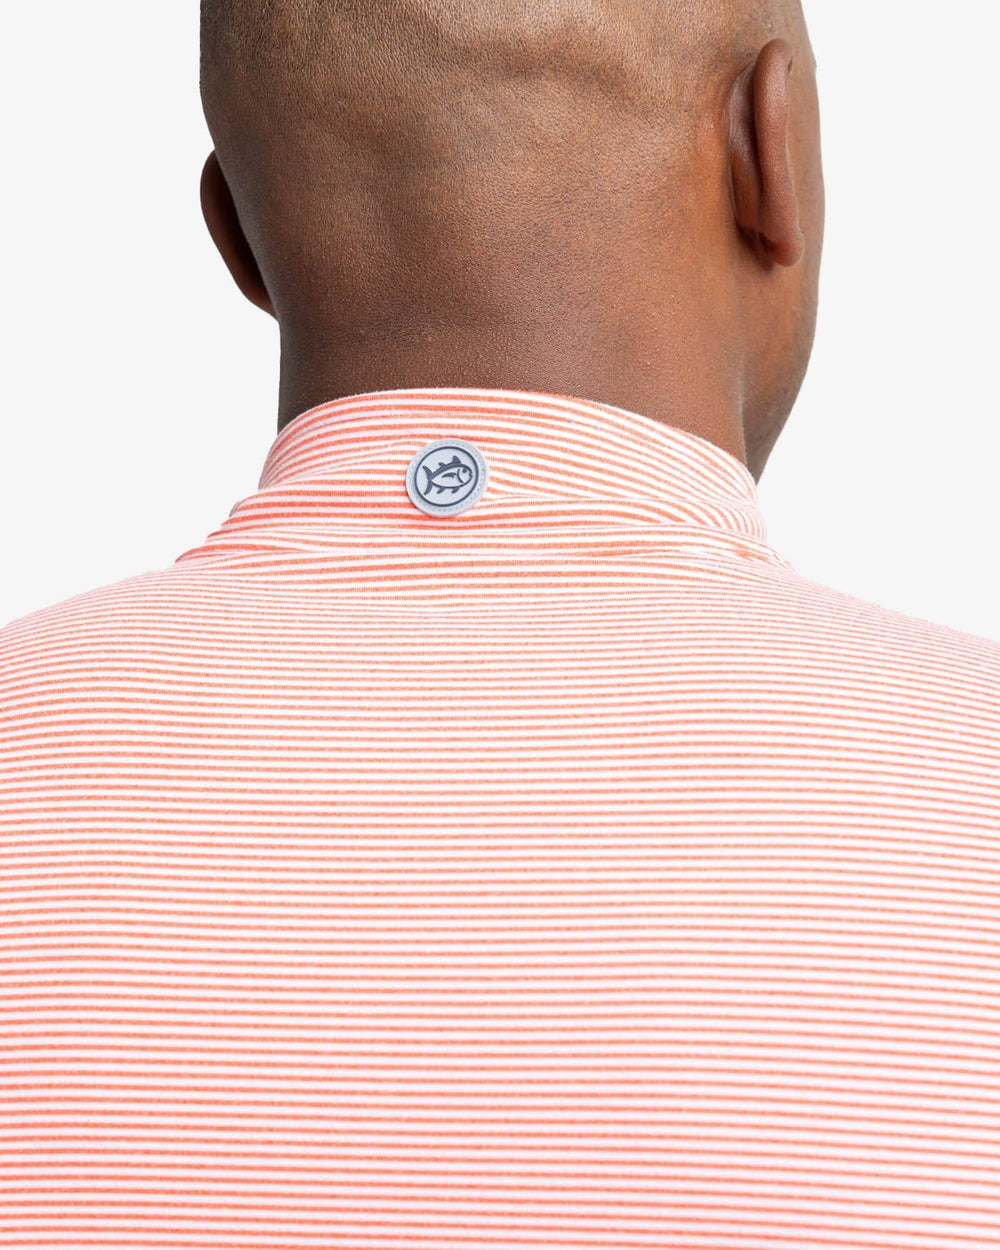 The yoke view of the Southern Tide Cruiser Micro-Stripe Heather Quarter Zip by Southern Tide - Heather Endzone Orange